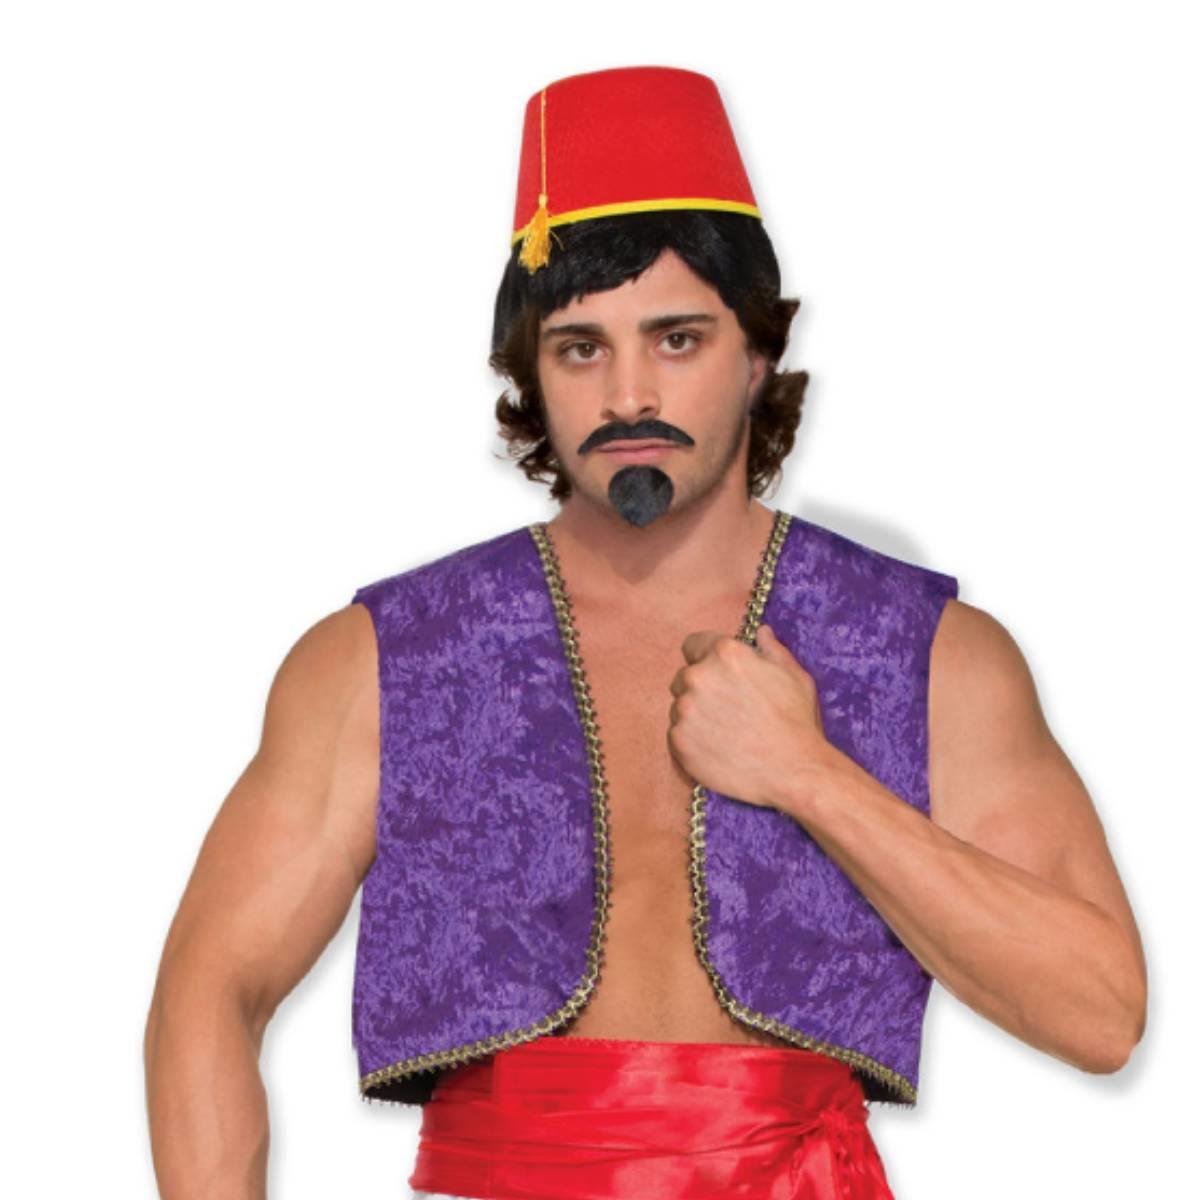 Arabian Prince or genie vest in purple trimmed with gold by Forum Novelties 76415 available here at Karnival Costumes online party shop